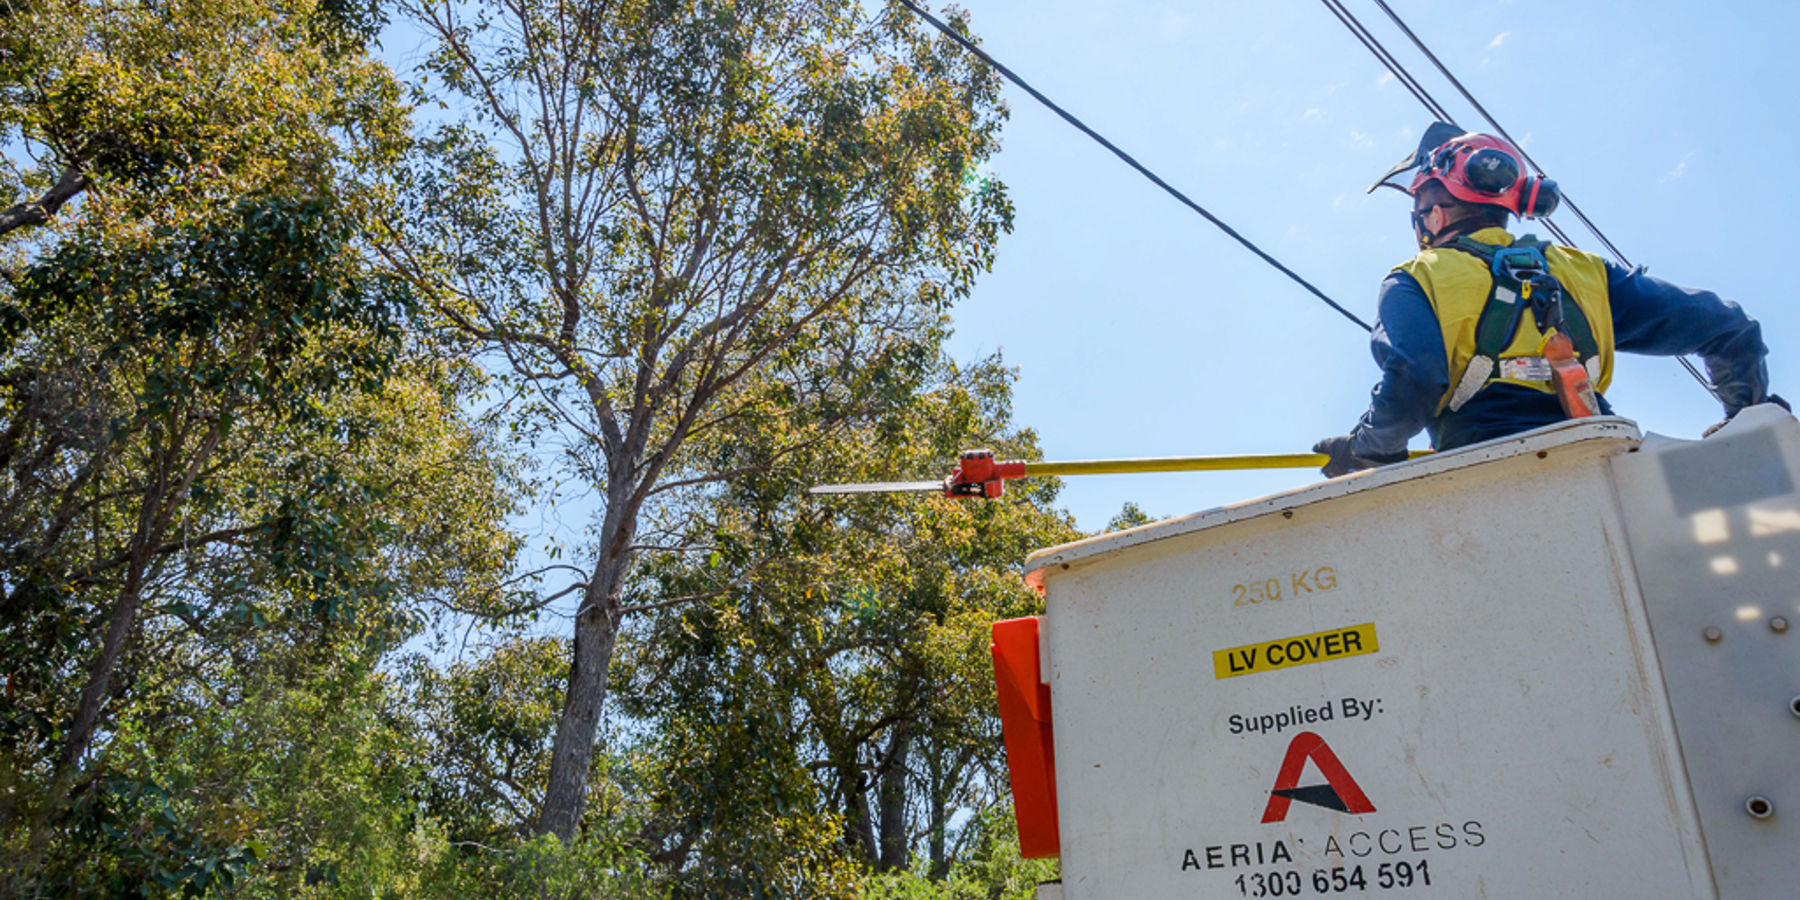 A man wearing safety equipment on an aerial work platform trimming trees that are located near powelines